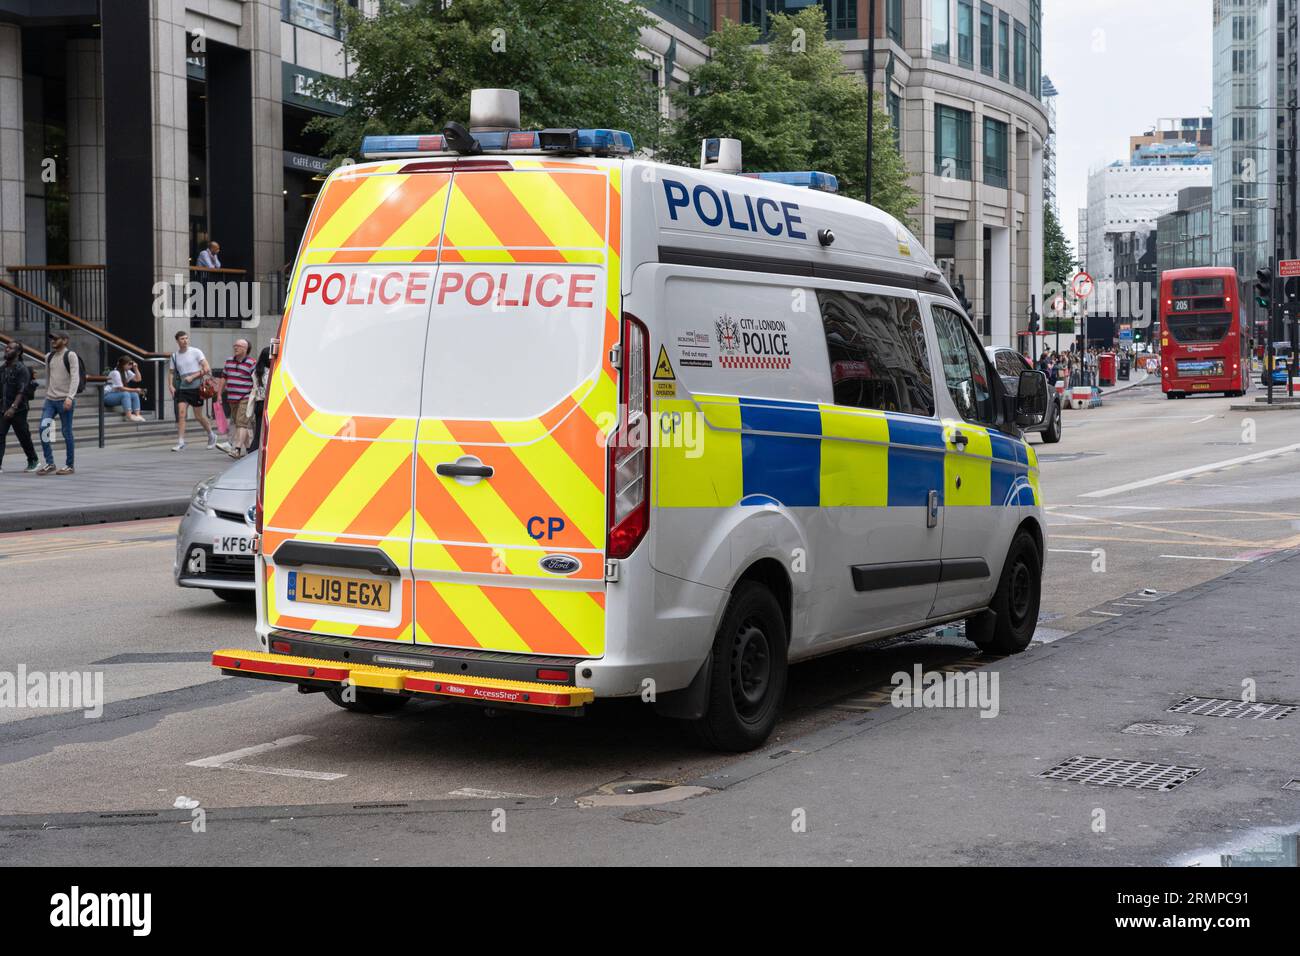 A police van parked on the A10 in London - part of the City of London police force. England. Concept: crime rate, investigating crimes Stock Photo